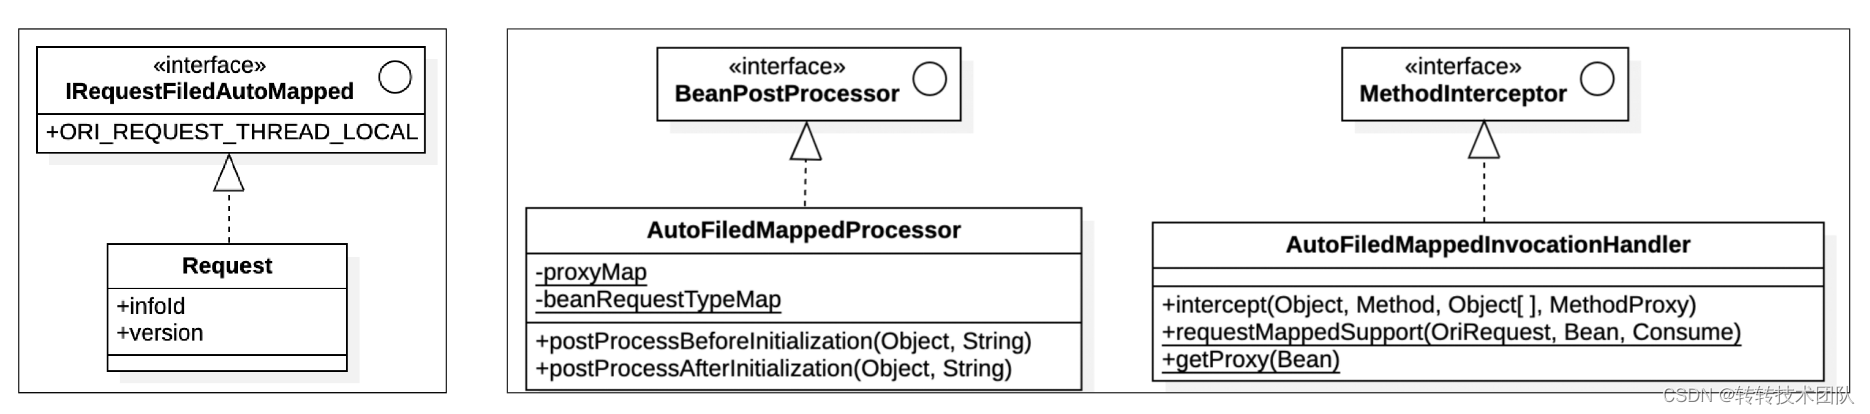 Figure 26 Request parameters, automatic mapping processing class diagram